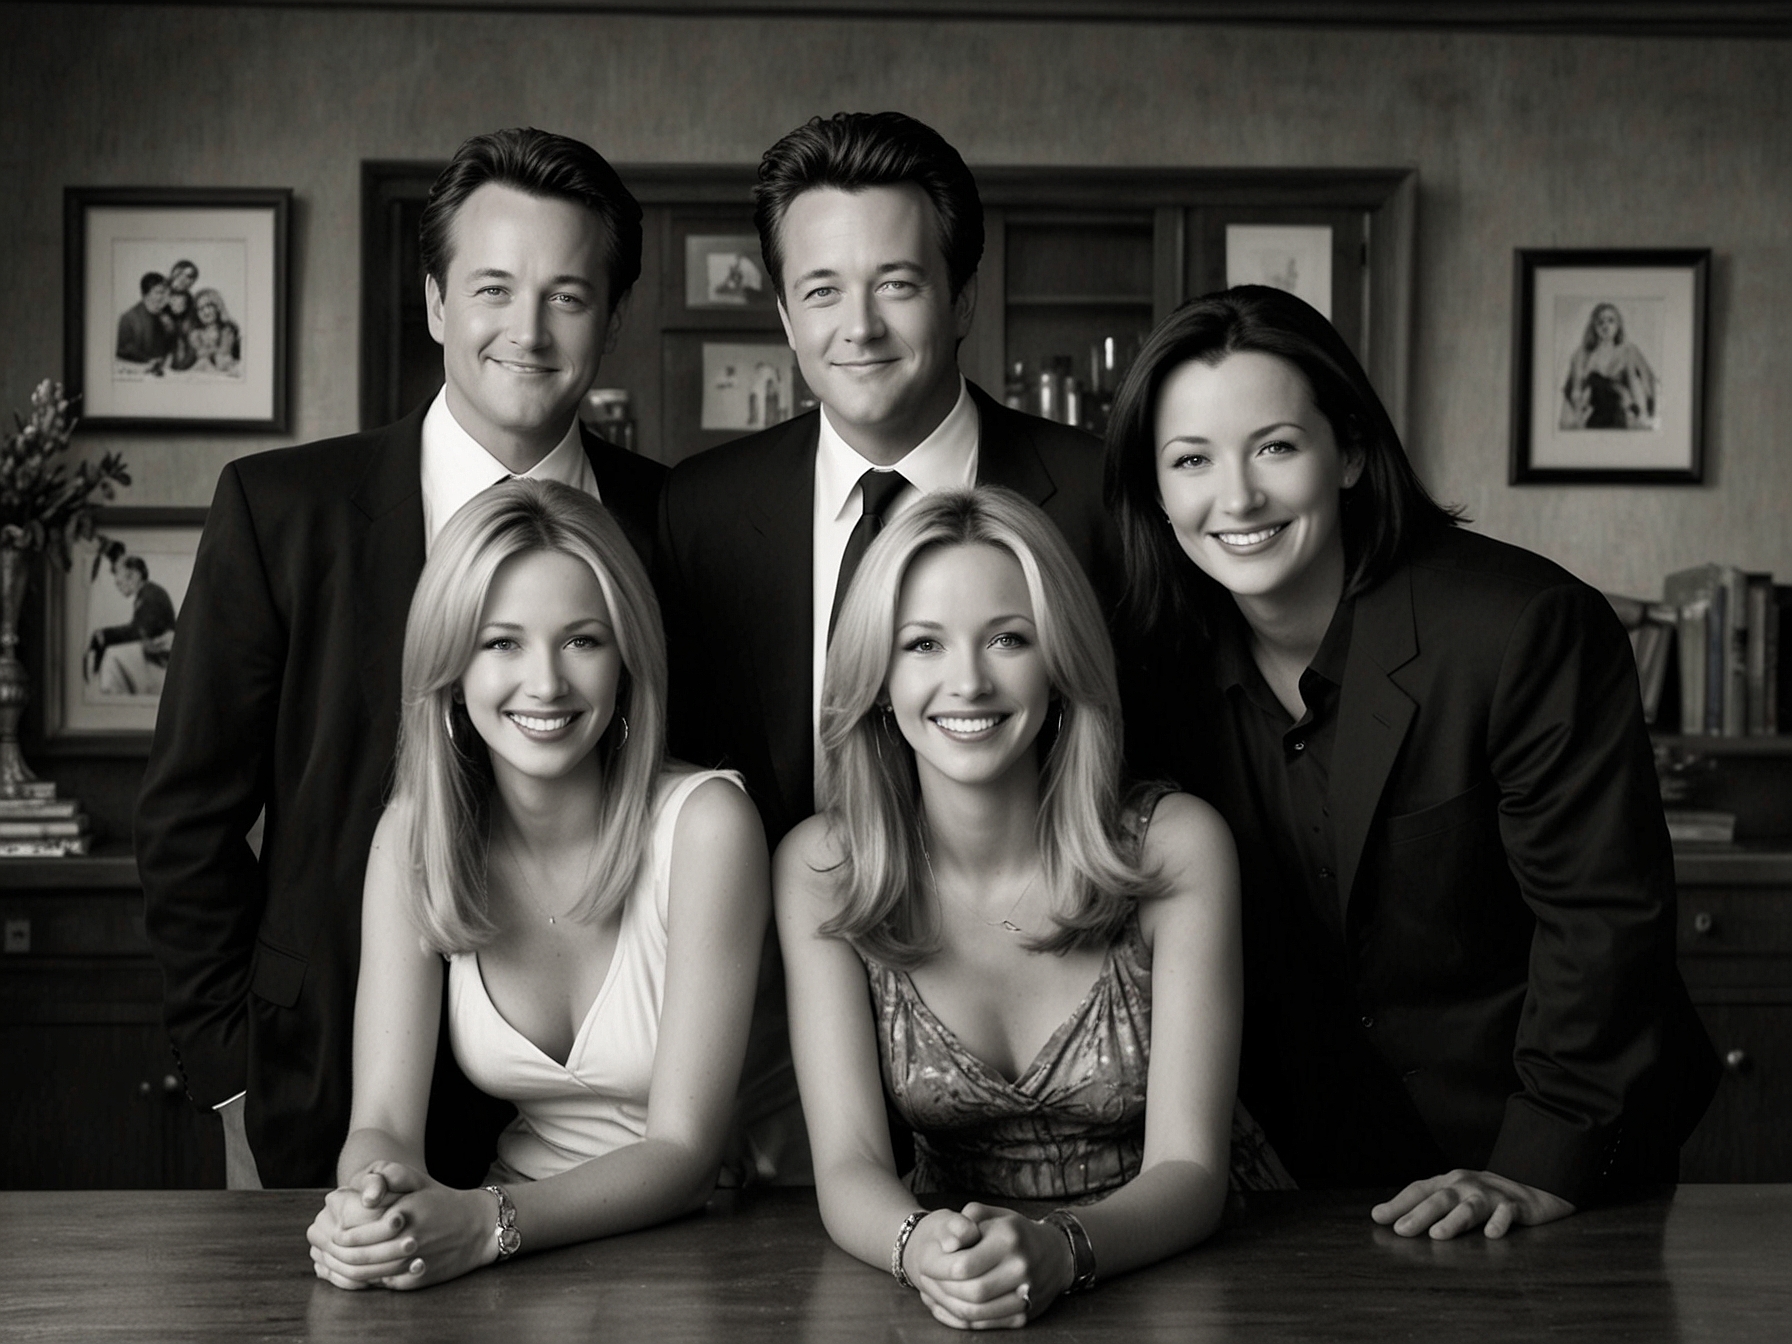 A classic 'Friends' cast photo with Matthew Perry and Lisa Kudrow front and center, highlighting the strong bond and memories they share on and off the screen.